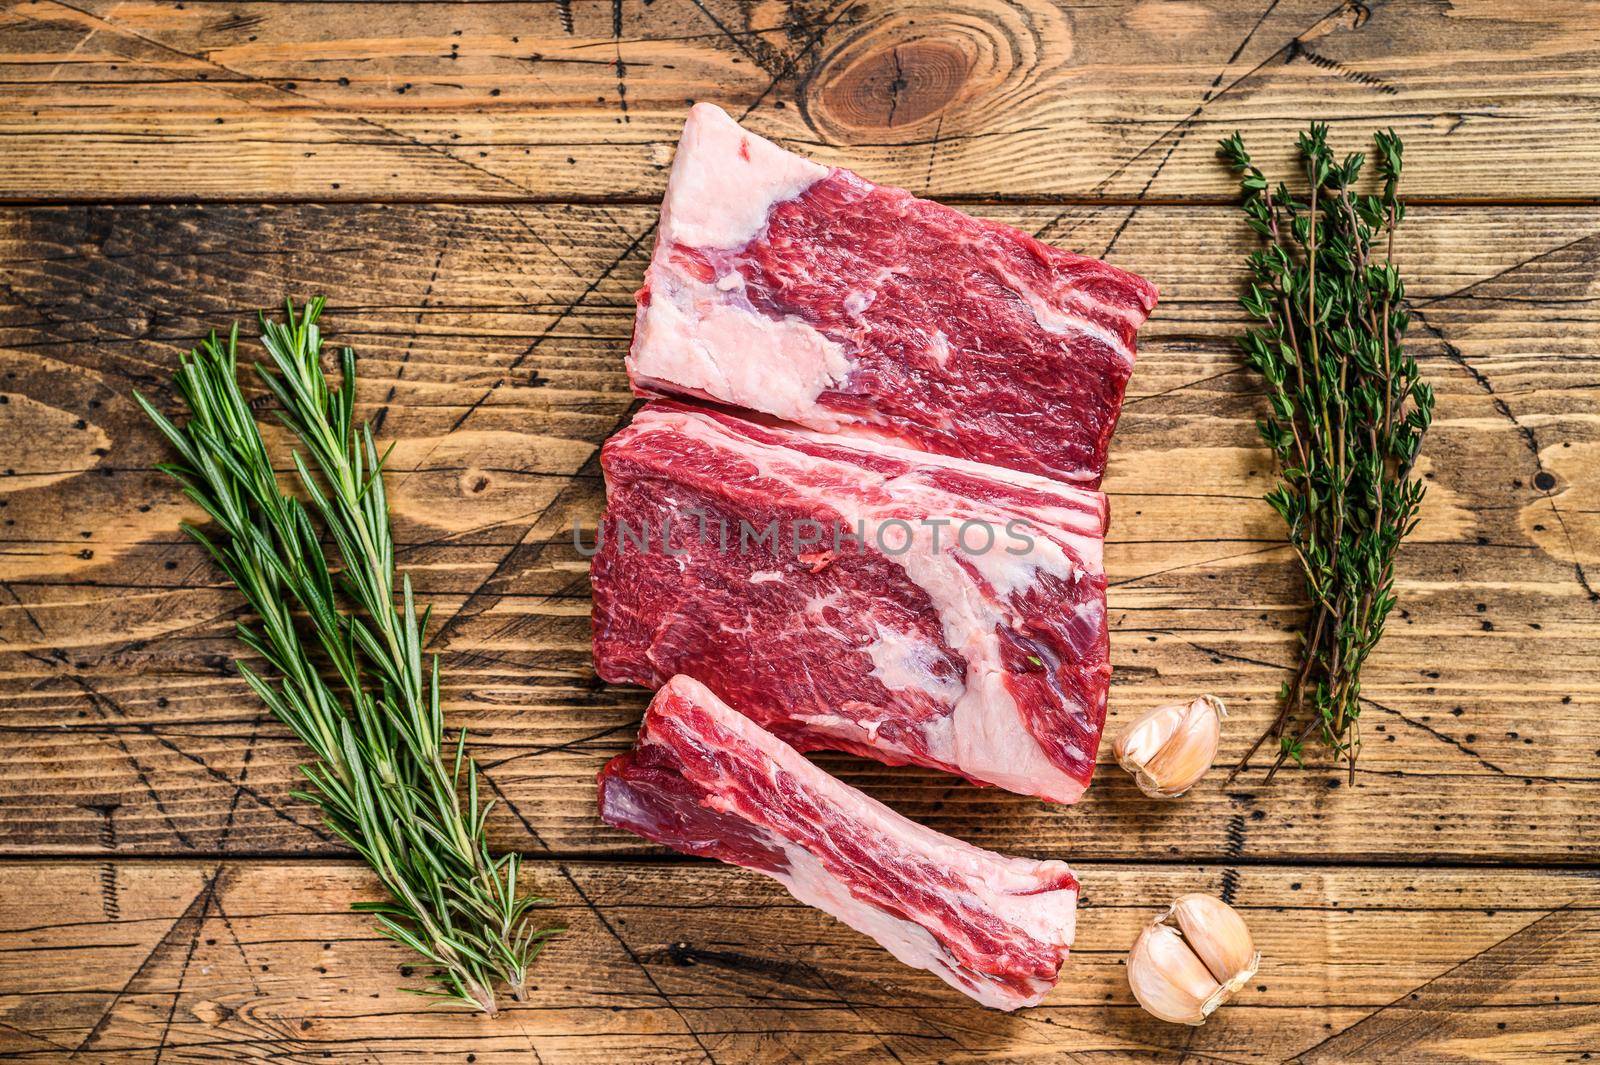 Fresh Beef short ribs on butcher wooden table. Wooden background. Top view by Composter